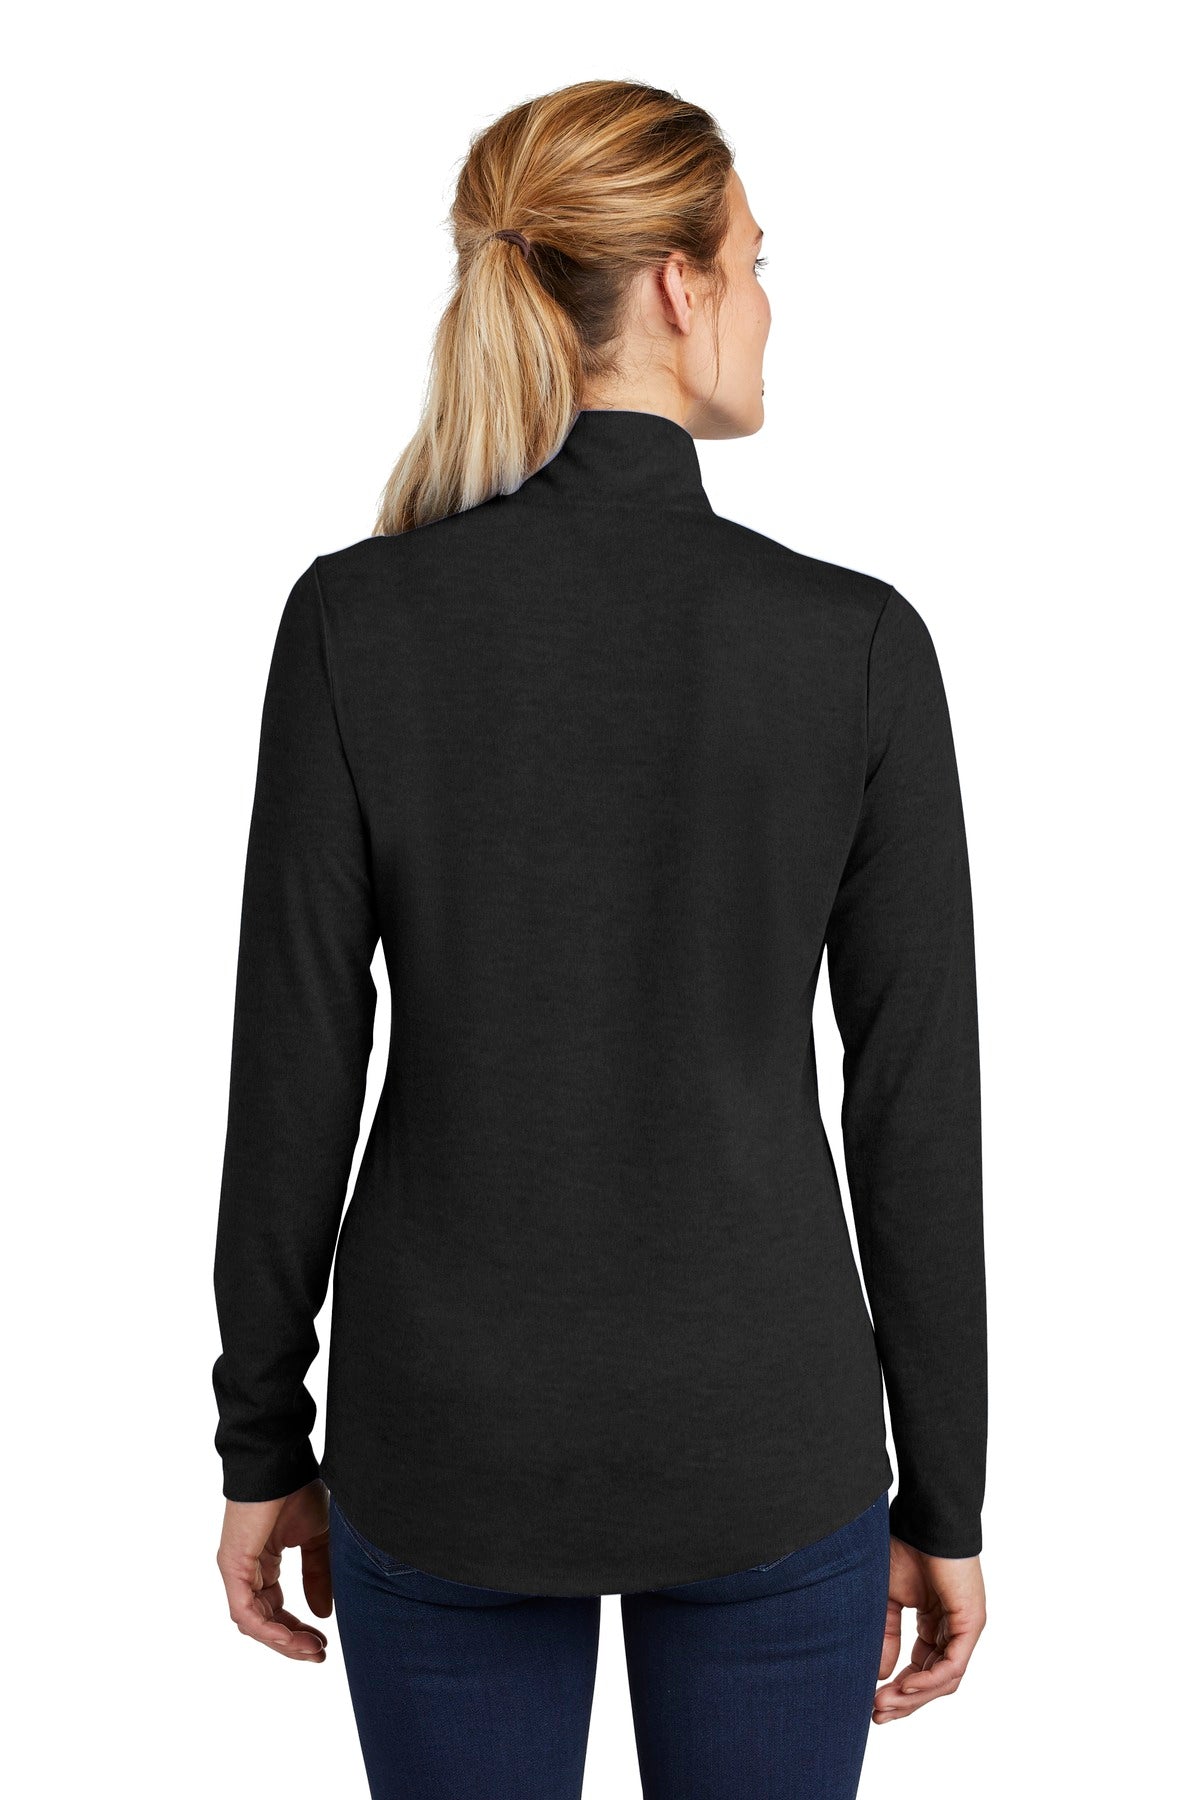 Ladies PosiCharge ® Tri-Blend Wicking 1/4-Zip Pullover. LST407